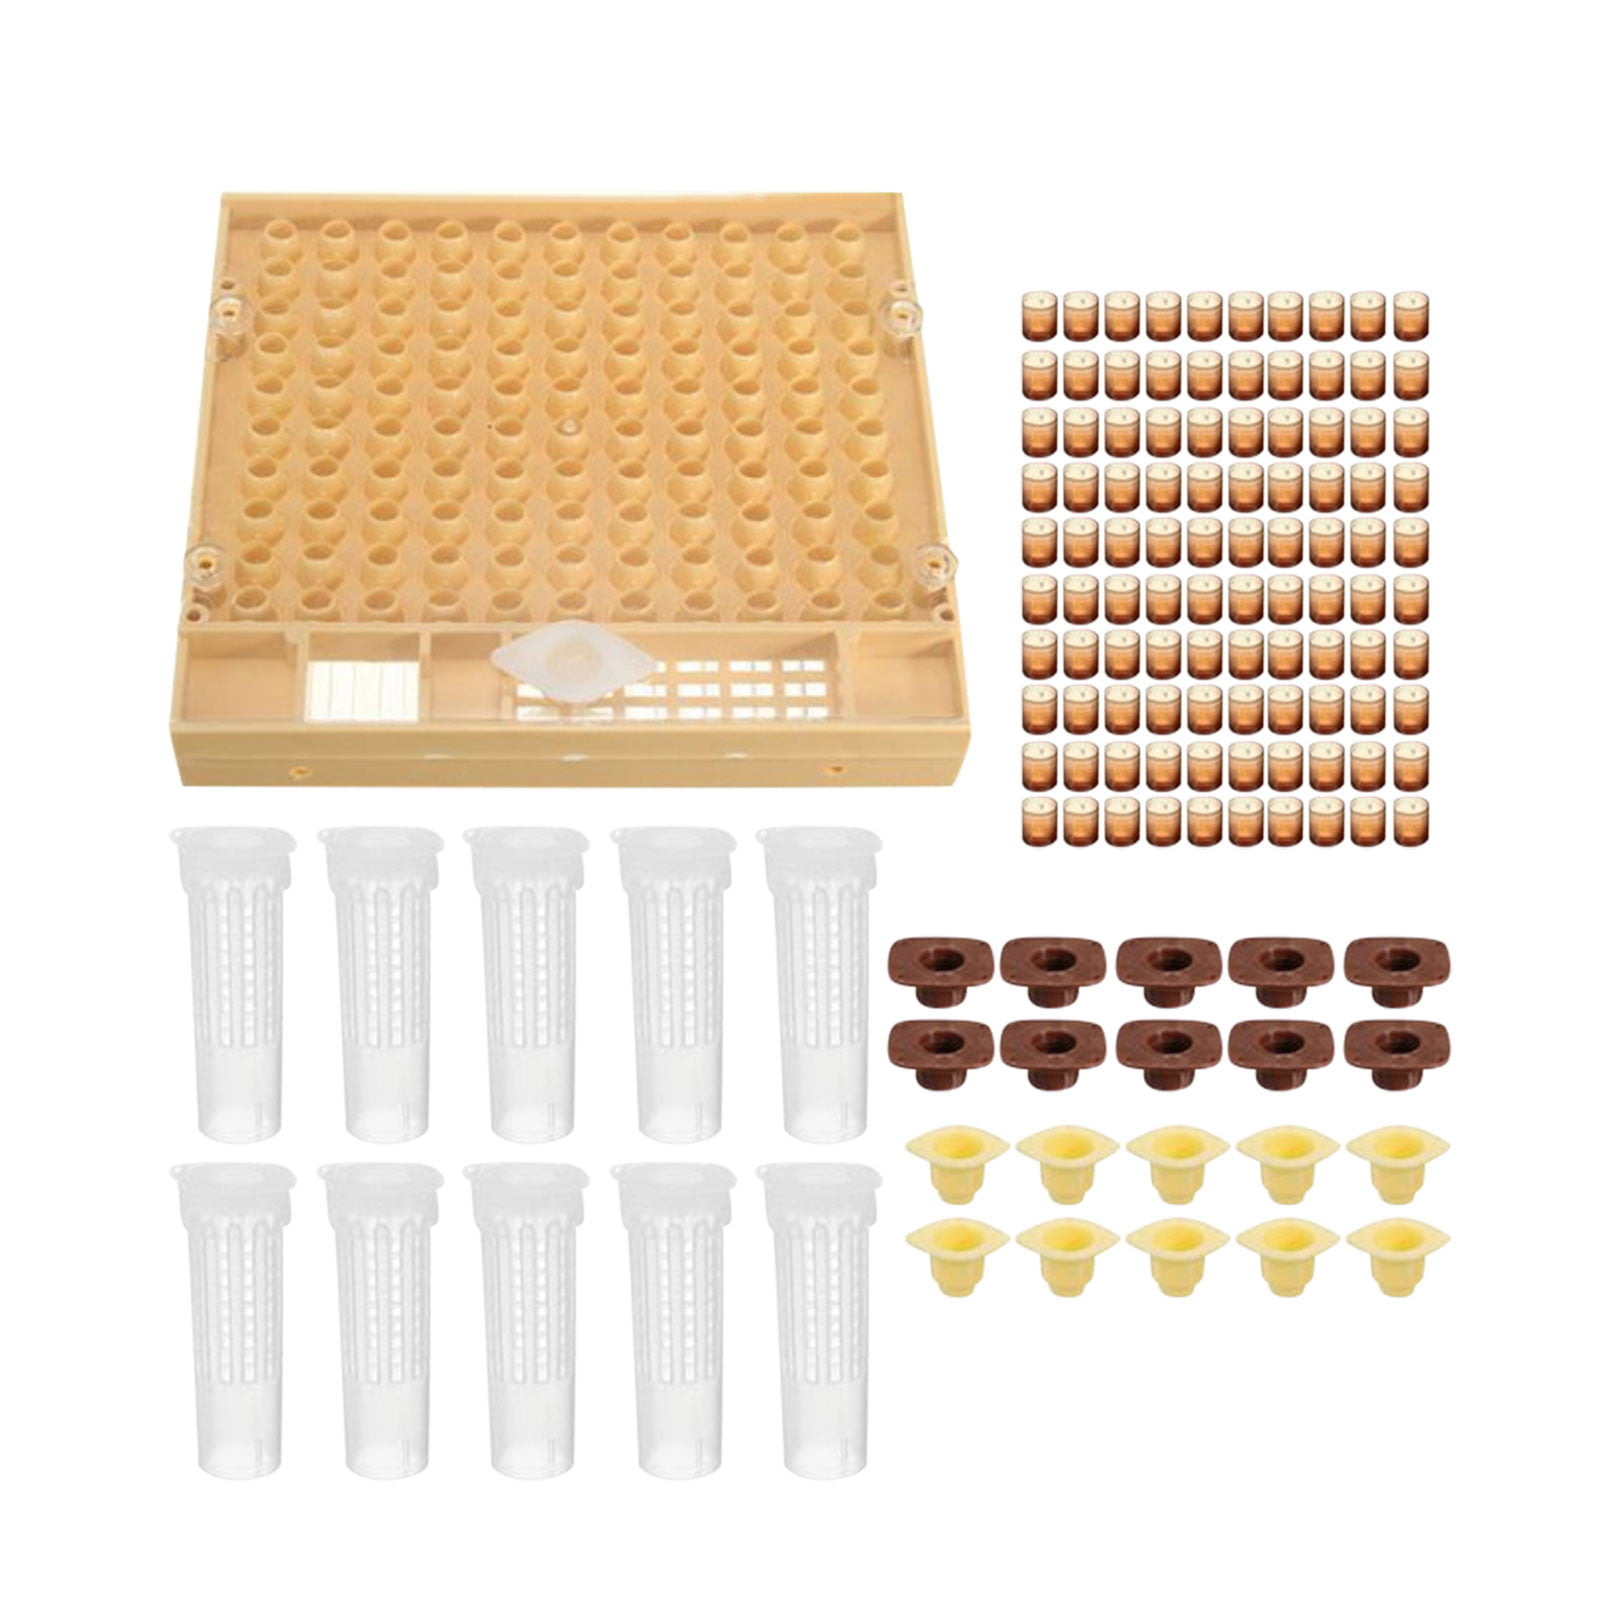 Bee Queen Rearing Cupkit Complete Box Beekeeping Cage Cell Cup Kit 